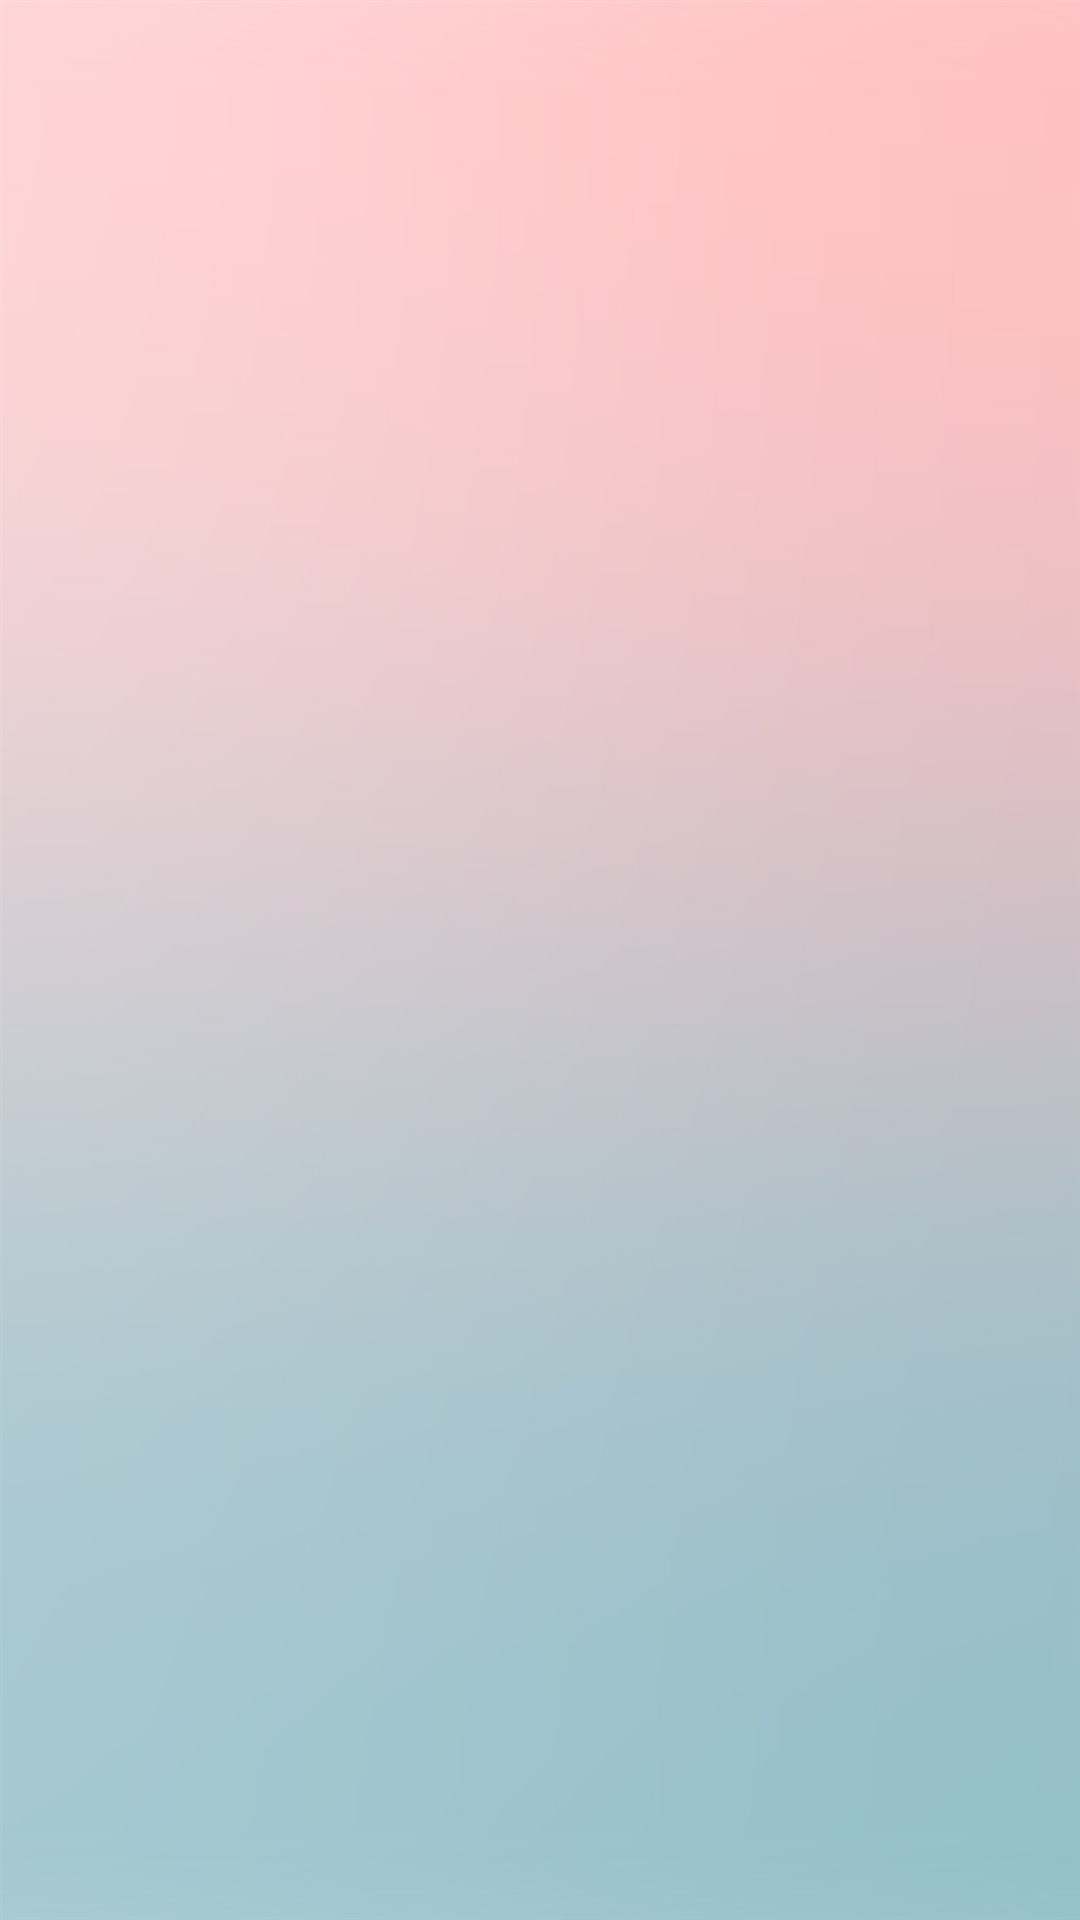 Pastel Blue And Pink